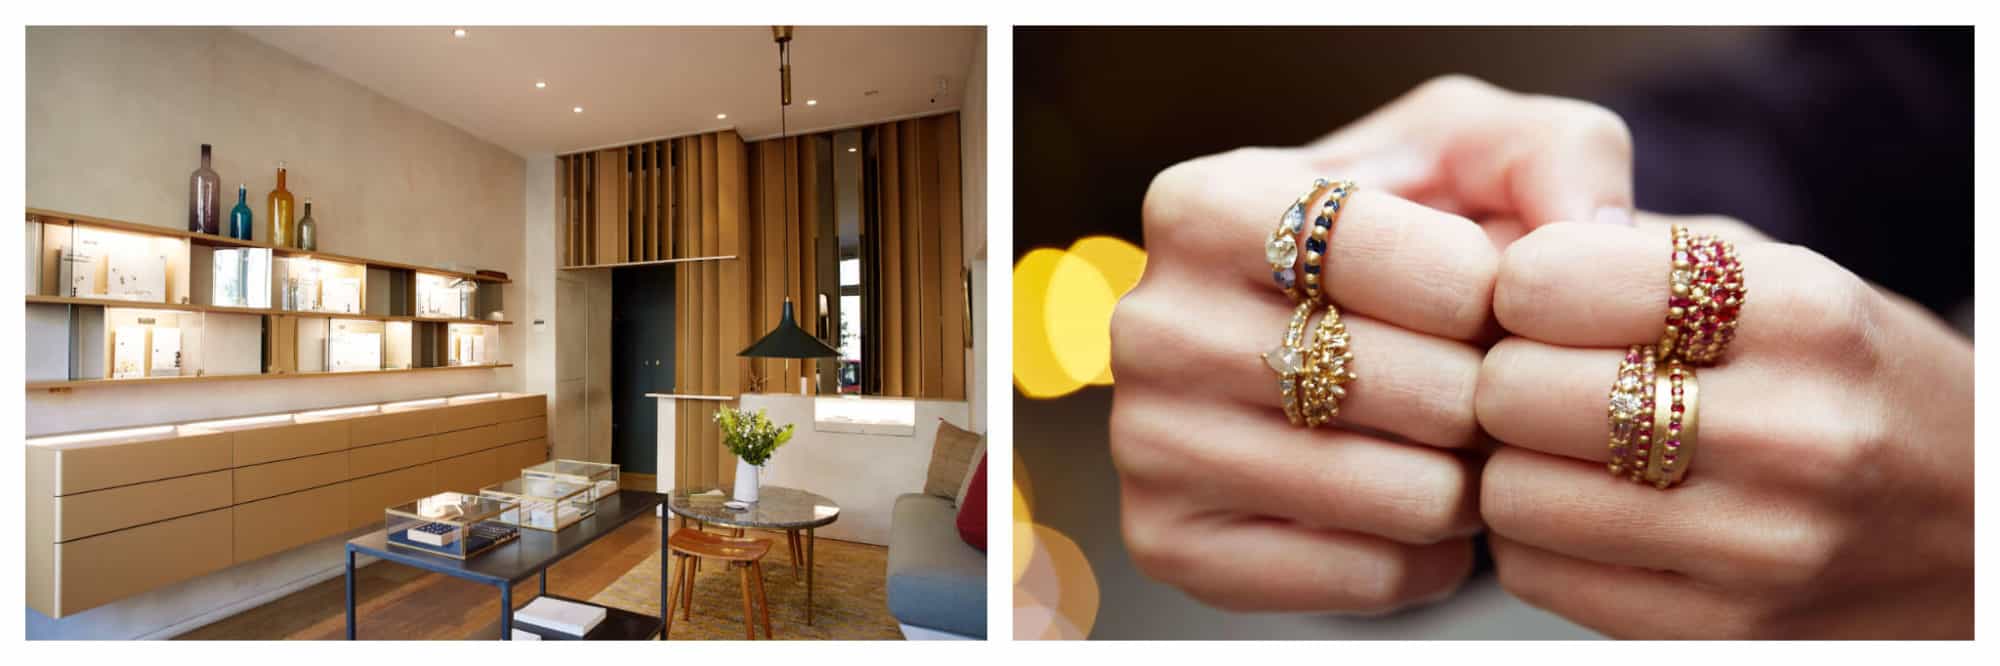 On left: At White Bird, with three Paris locations, shoppers can peruse the polished displays for an international curation of jewelry by independent designers. On right: Multi-colored and dotted with diamonds, the gold rings designed by Polly Wales put the "statement" in statement jewelry. Her collection is available at White Bird, which has three locations in Paris. 